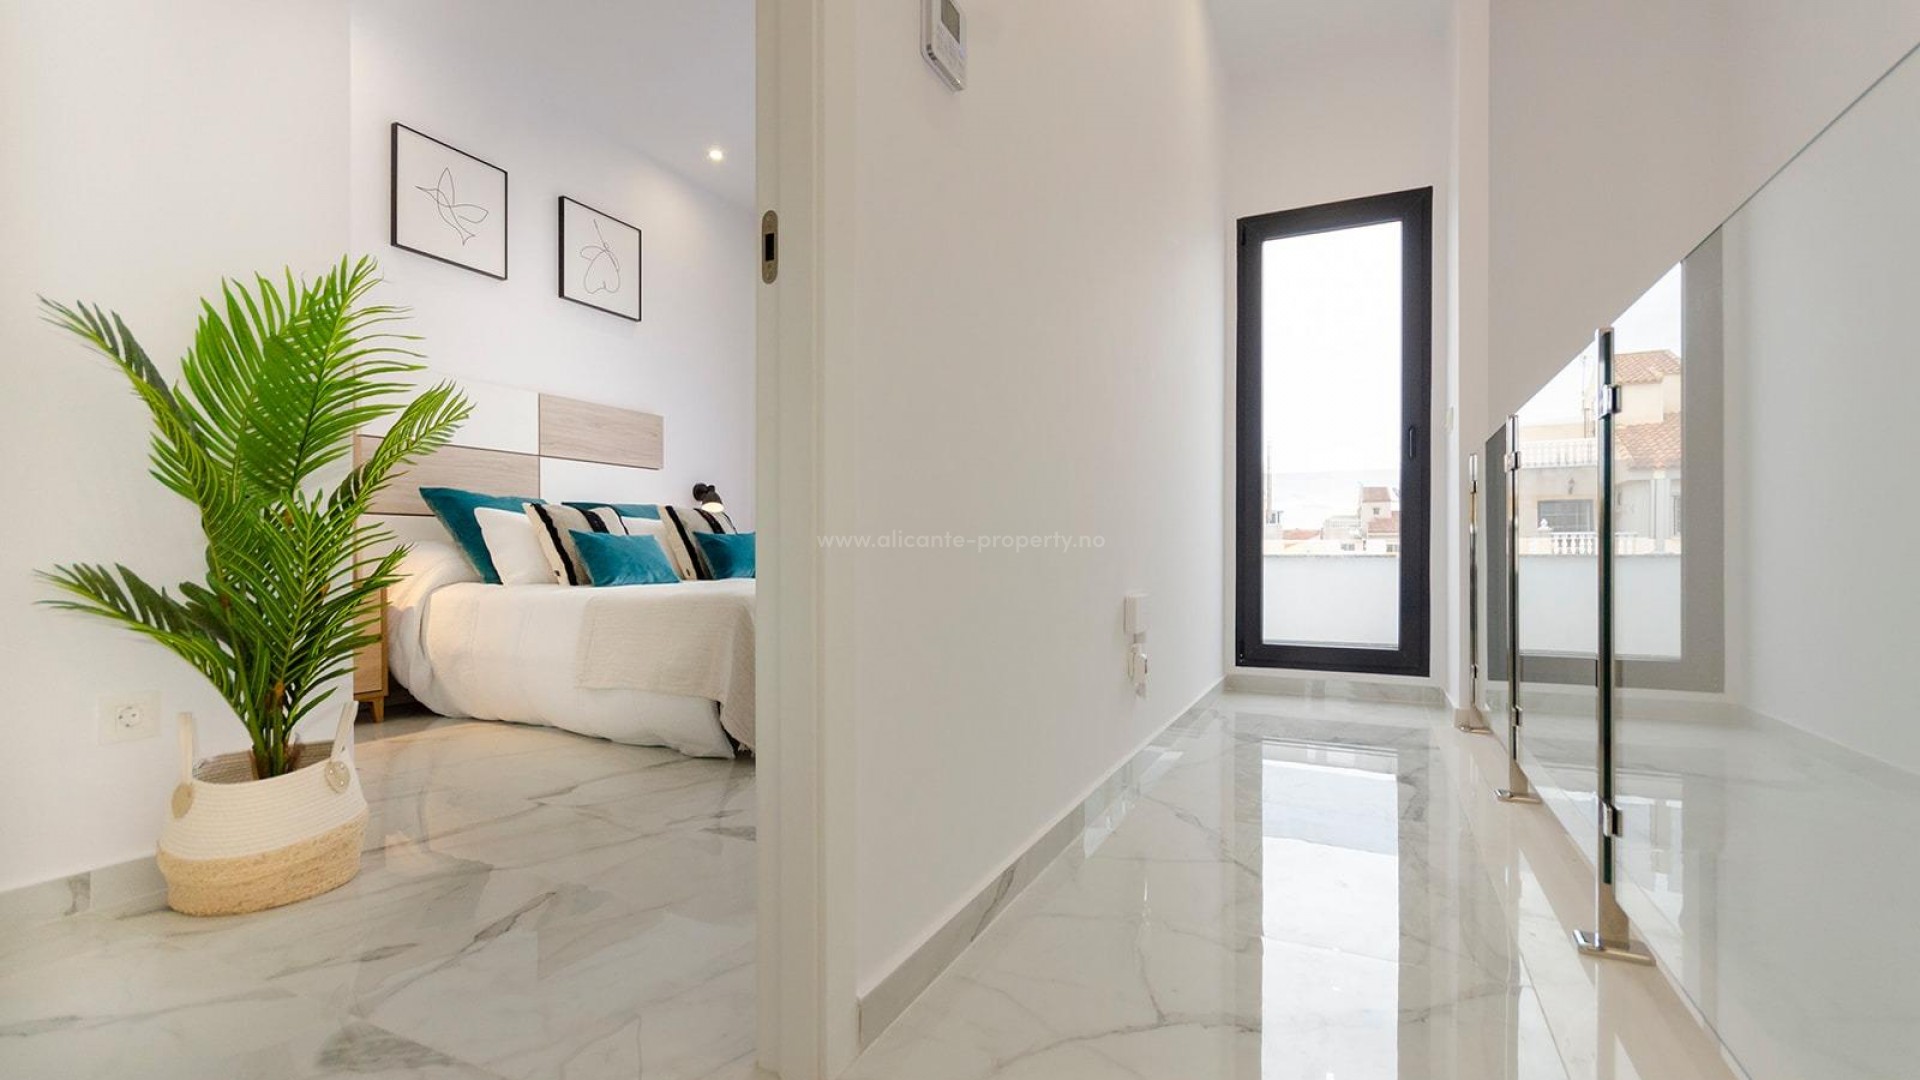 New villas/houses in Torreta, Torrevieja, 3 bedrooms, 3 bathrooms, terrace, private solarium, open kitchen with living room, garden with private pool and parking.